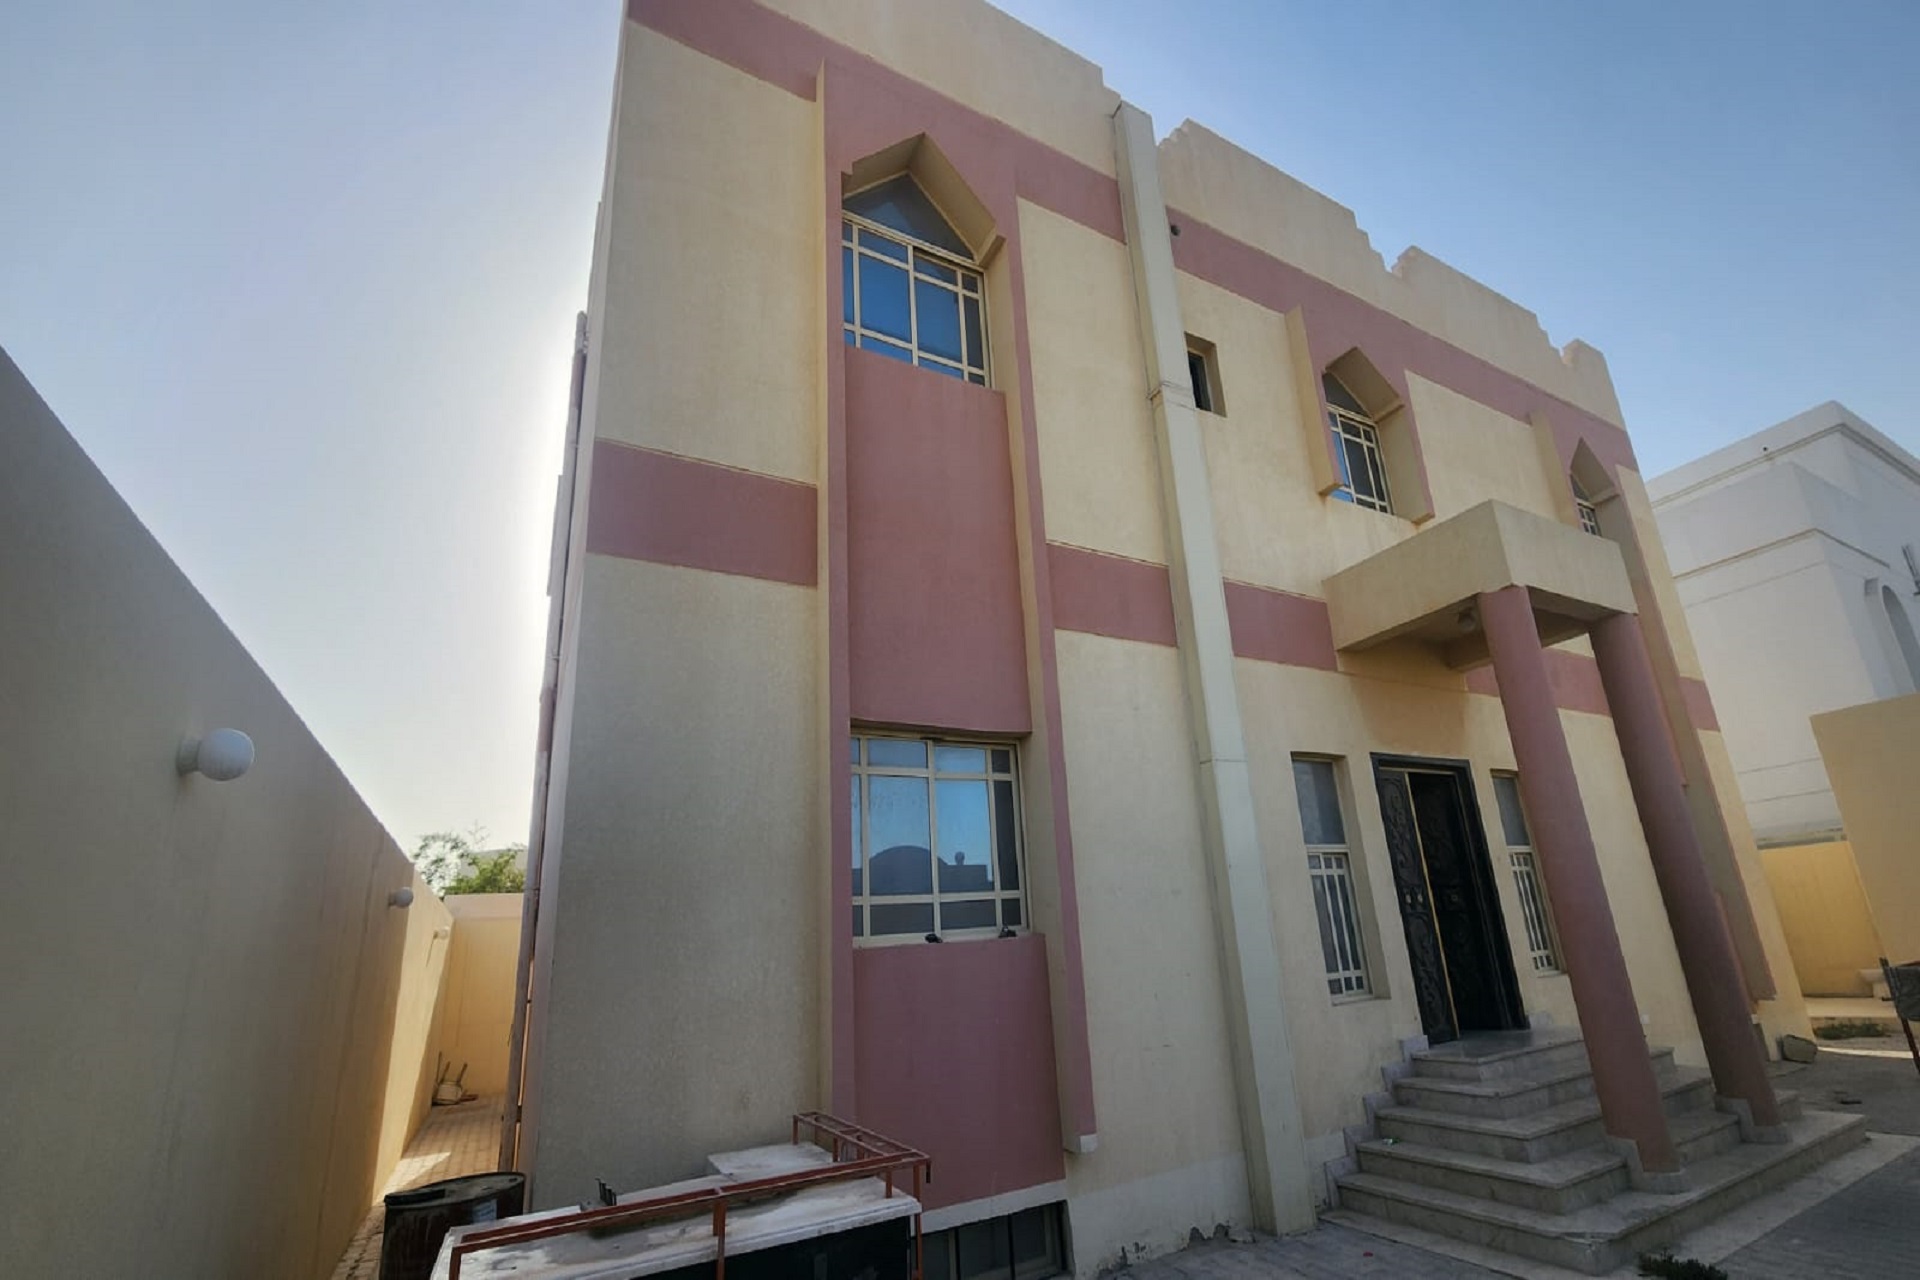 8 Bedrooms Stand Alone villa in Al Sakhama With Storage Space